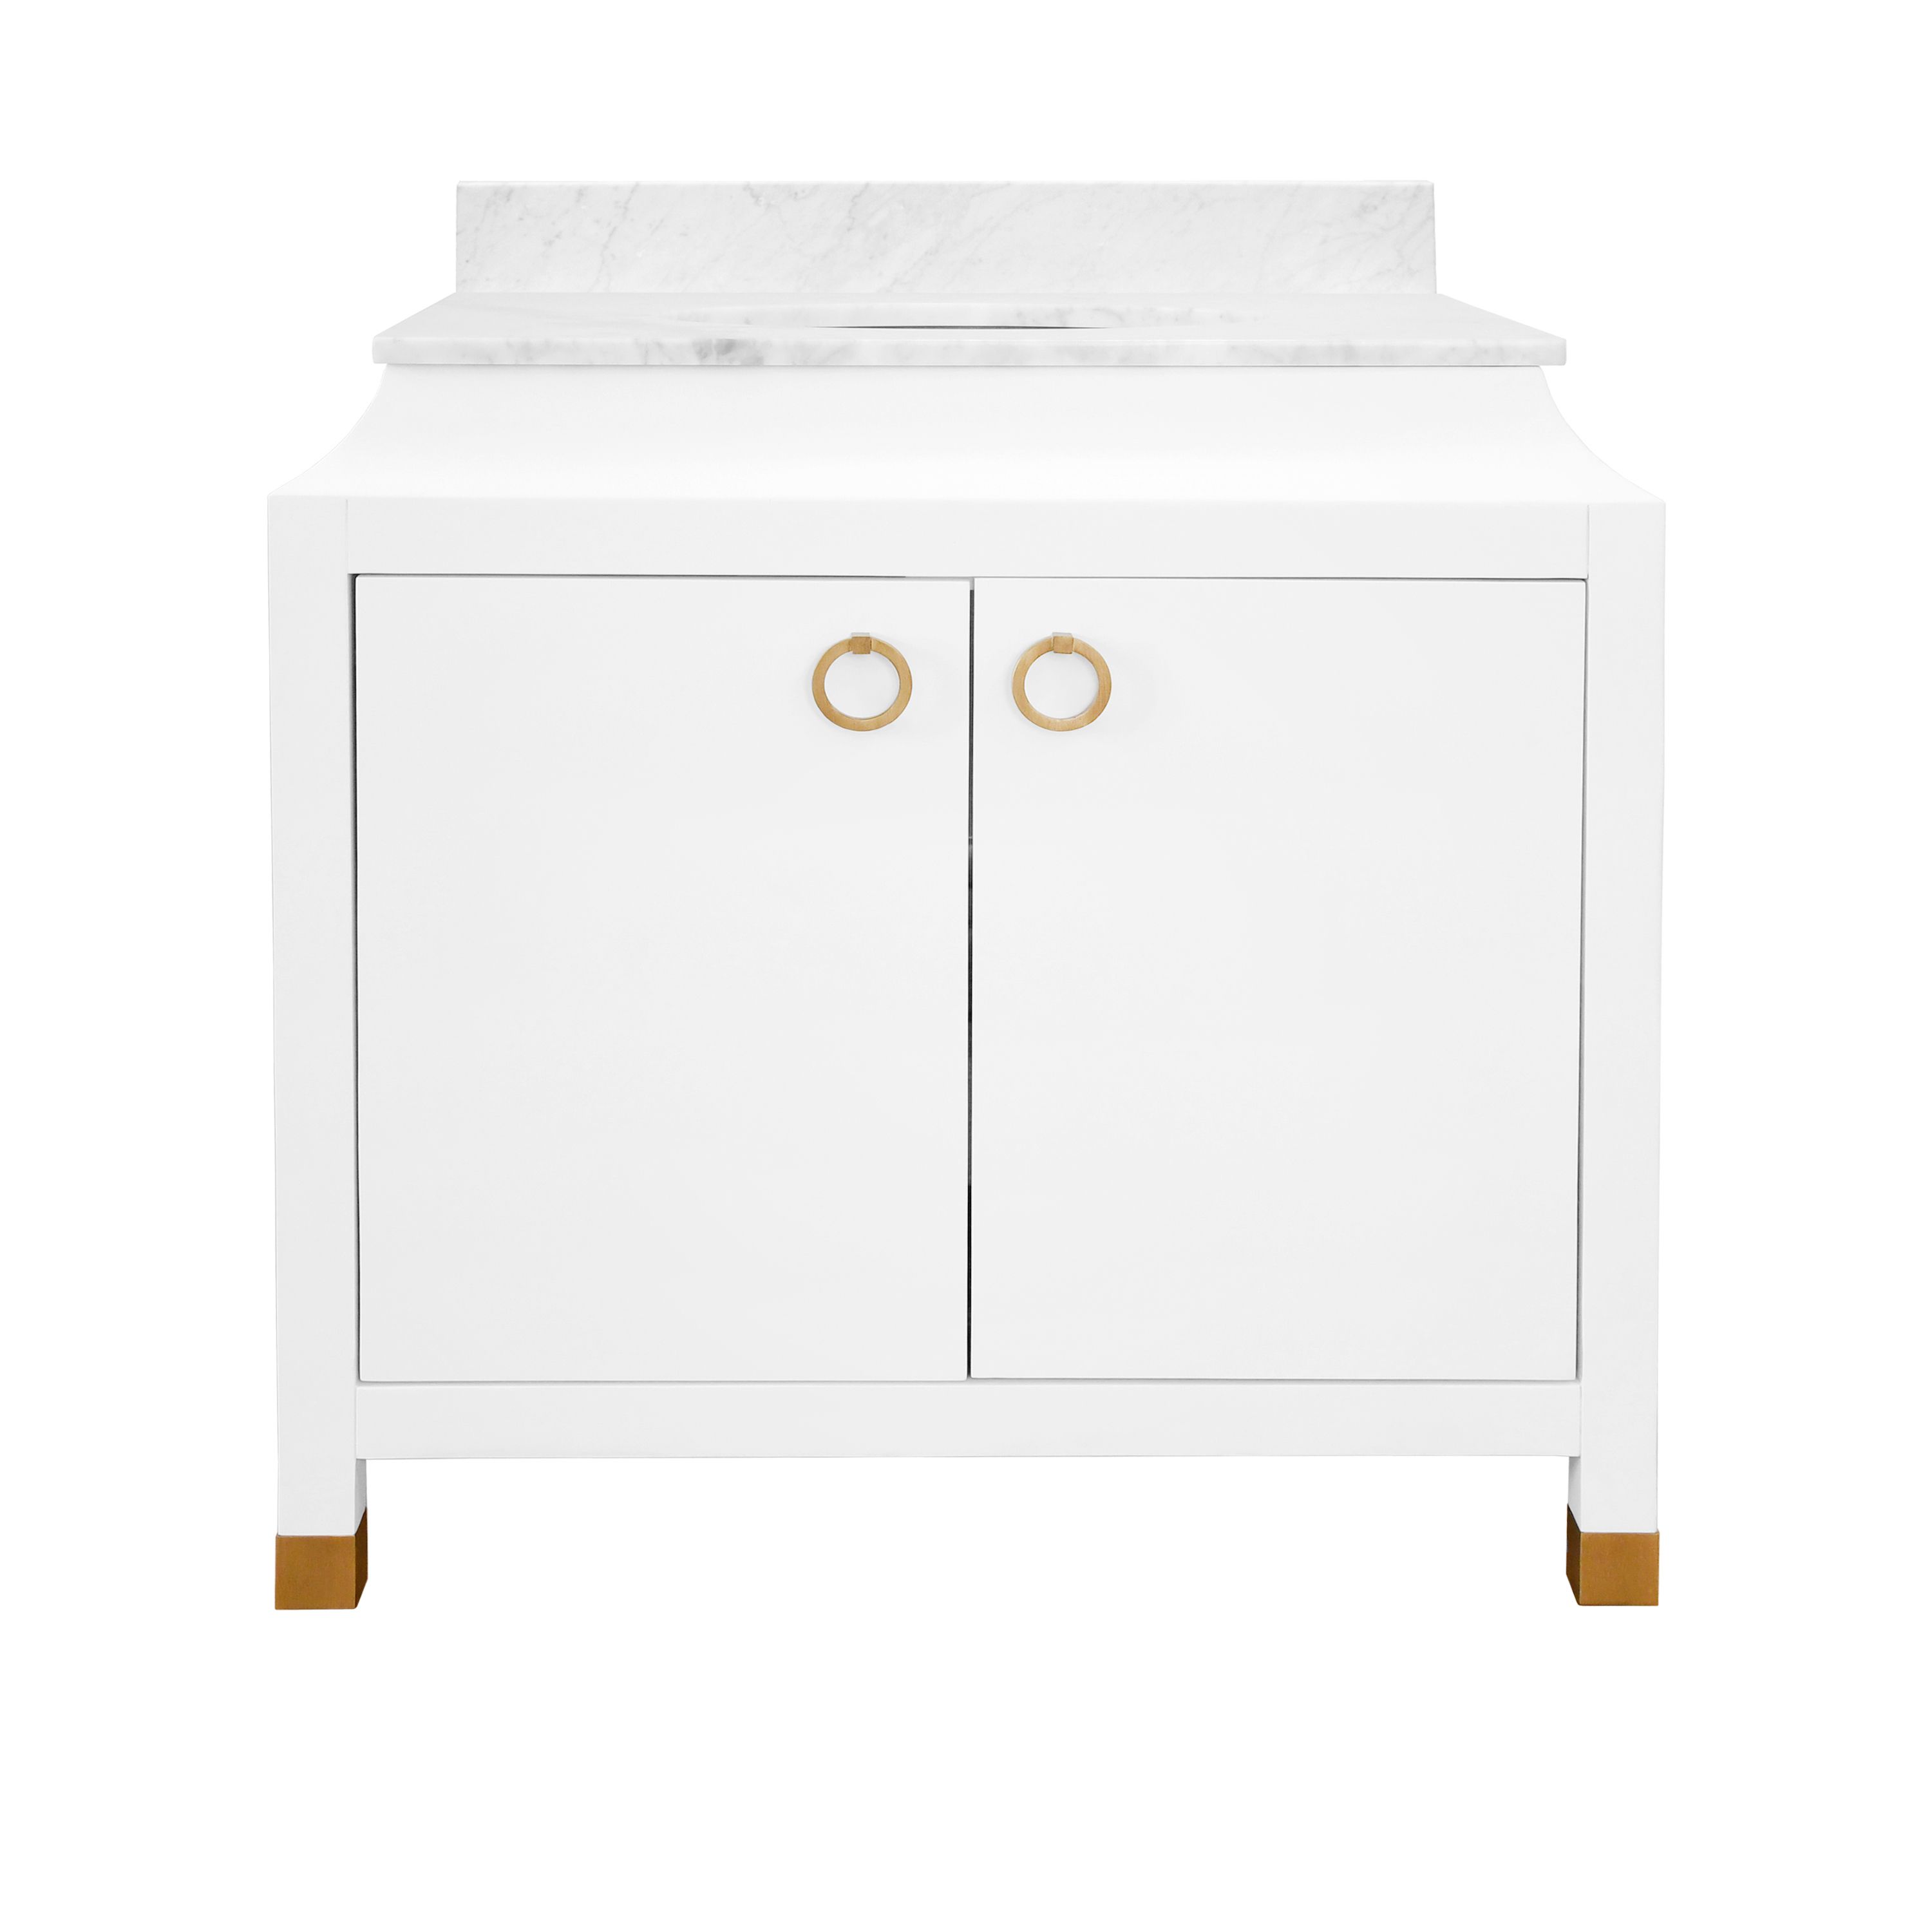 30" Issac Edwards Collection Bath Vanity in Textured Lacquer White Linen w/ Antique Brass Ring Hardware, White Marble Top and Porcelain Sink